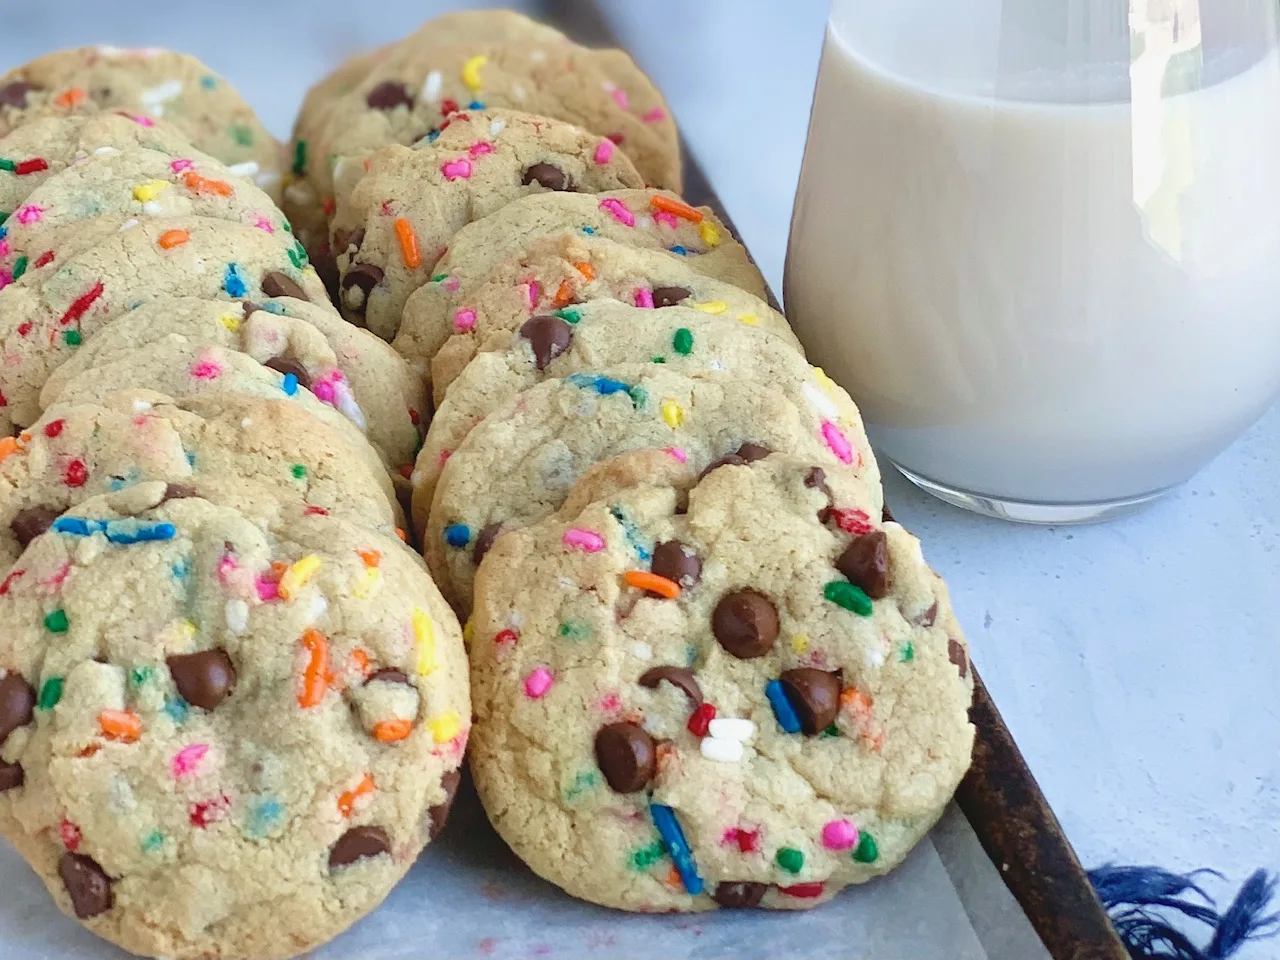 A baking sheet full of chocolate cookies with sprinkles next to a glass of dairy free milk.